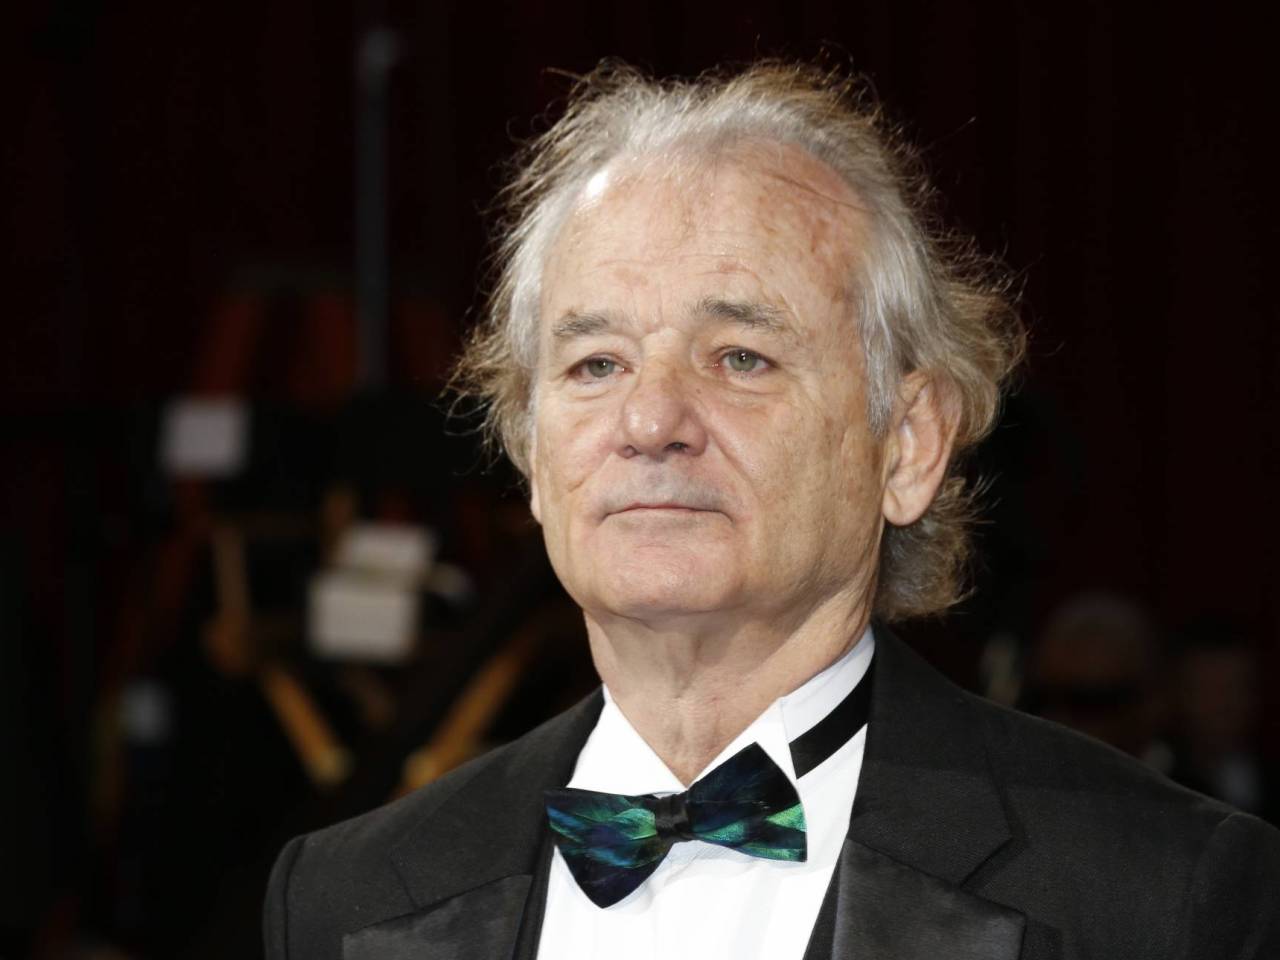 Bill Murray crashed some guy's bachelor party and gave a speech